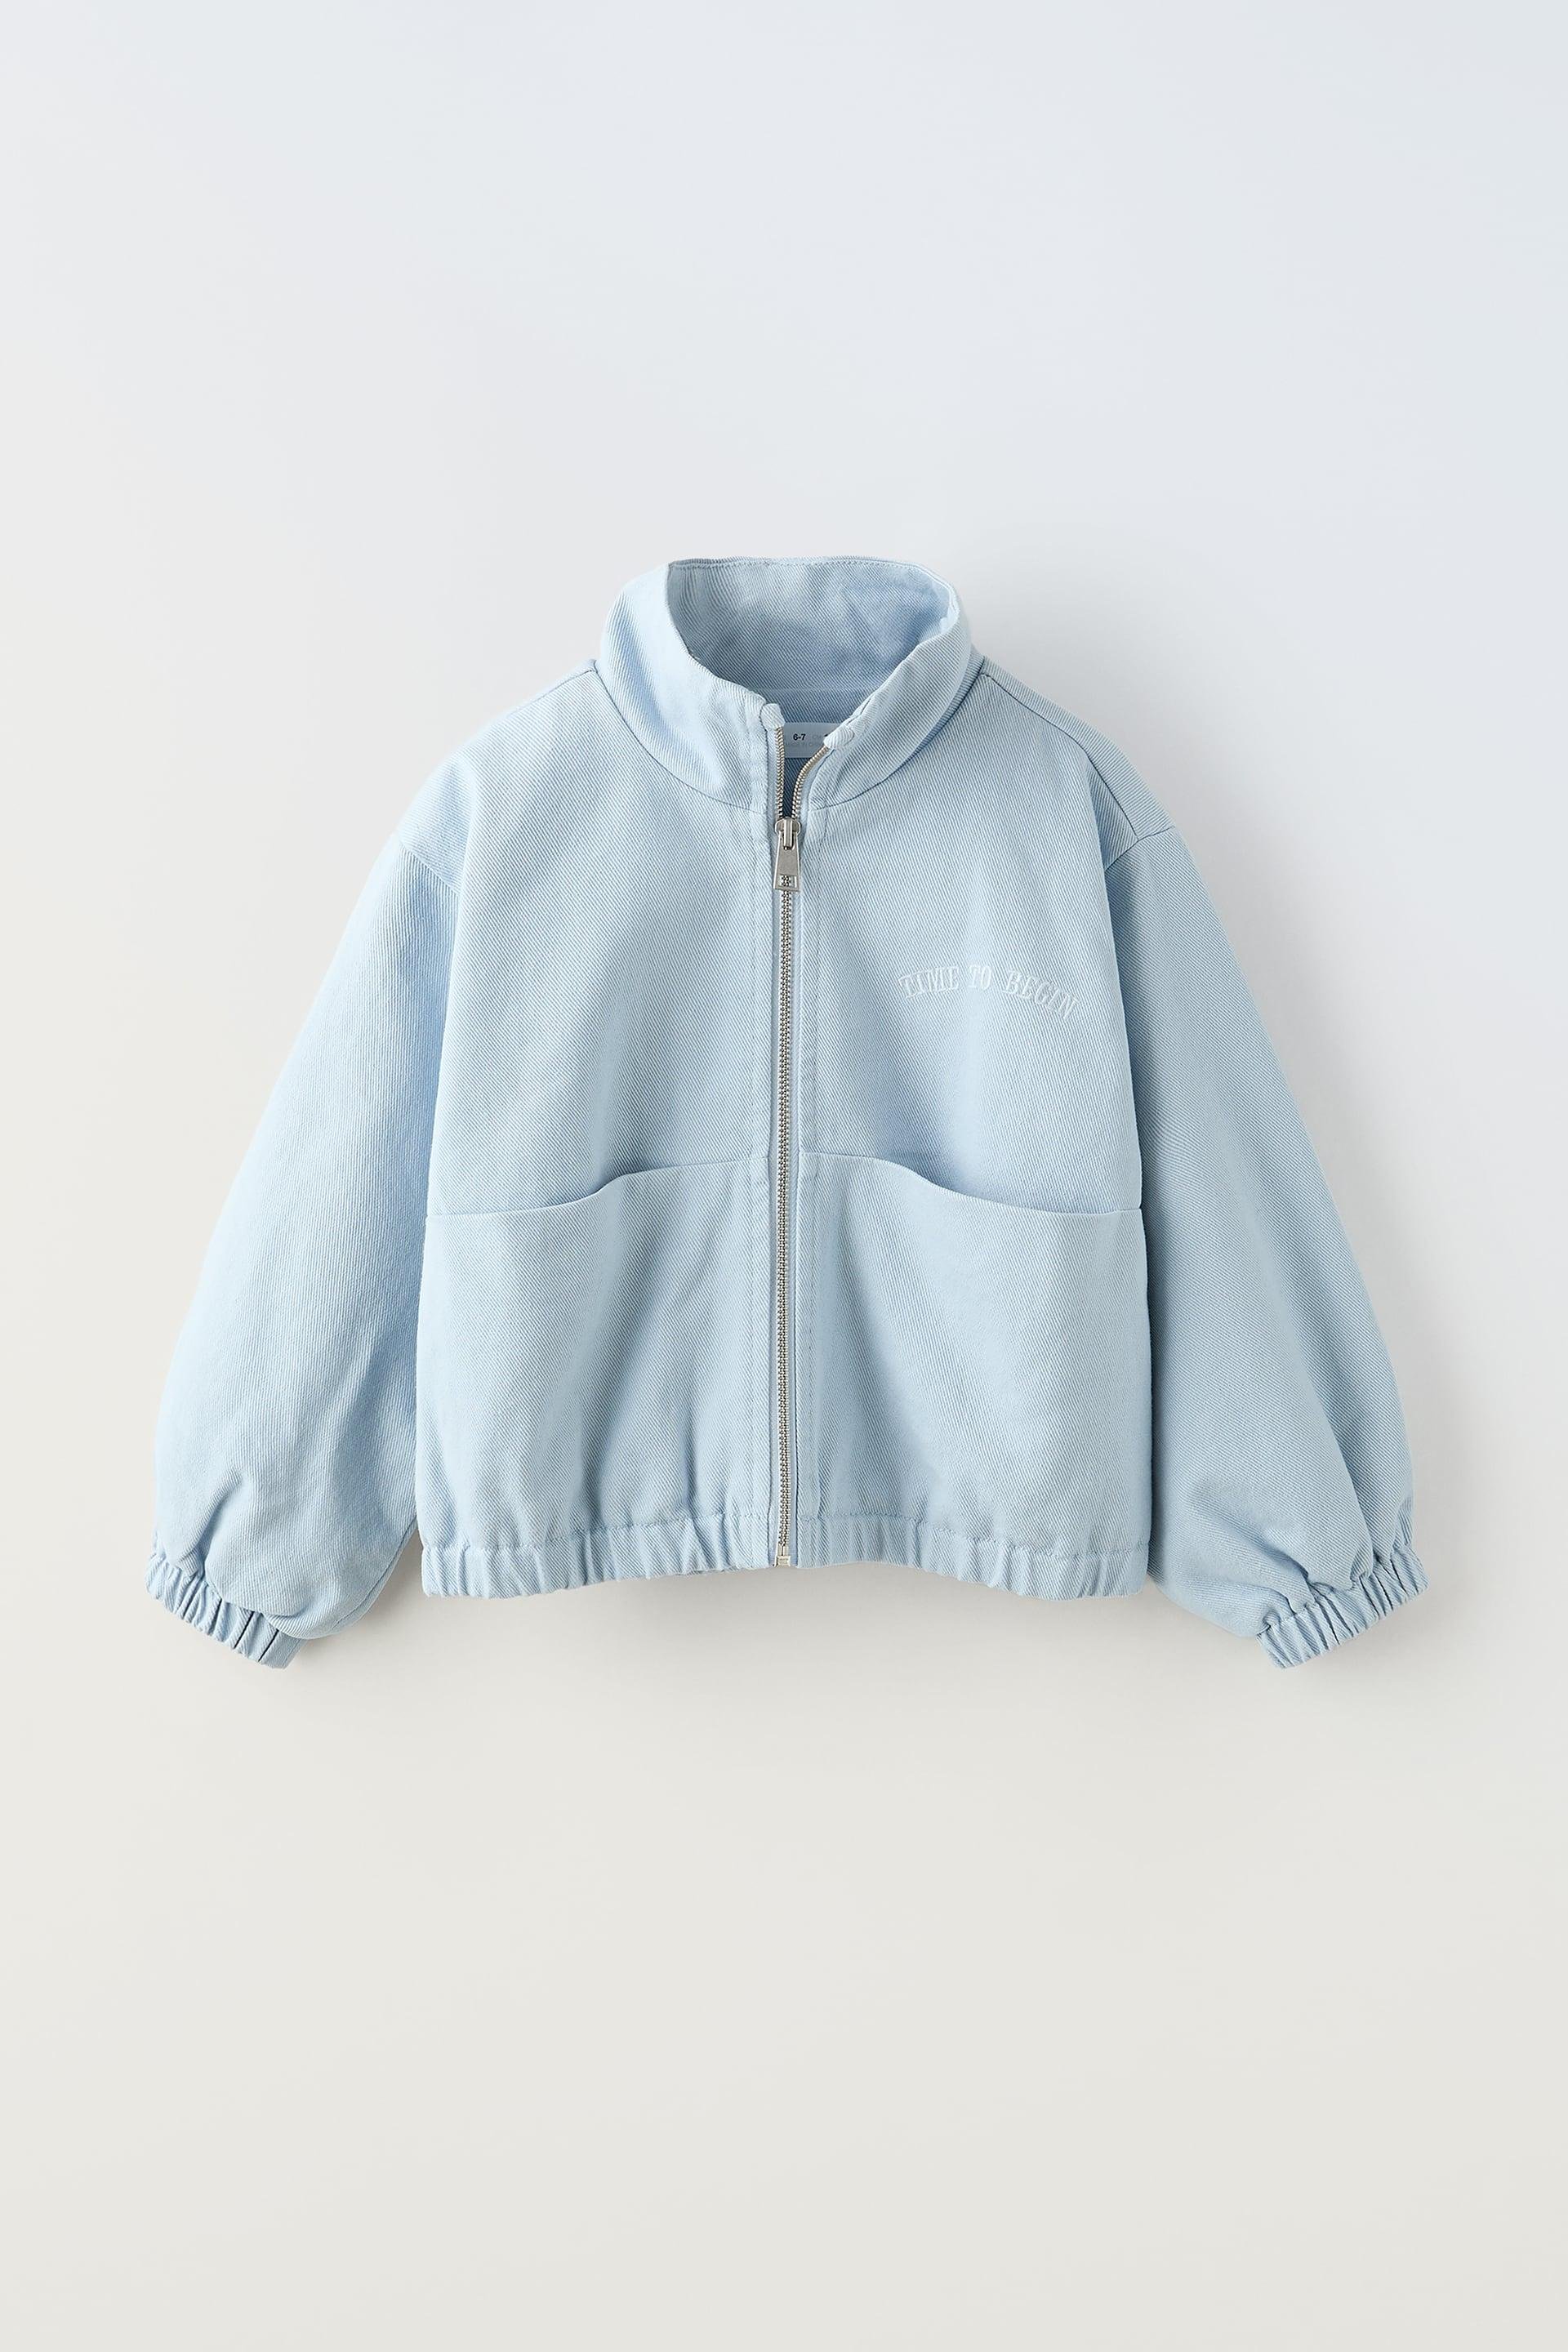 TWILL EMBROIDERED TEXT JACKET by ZARA